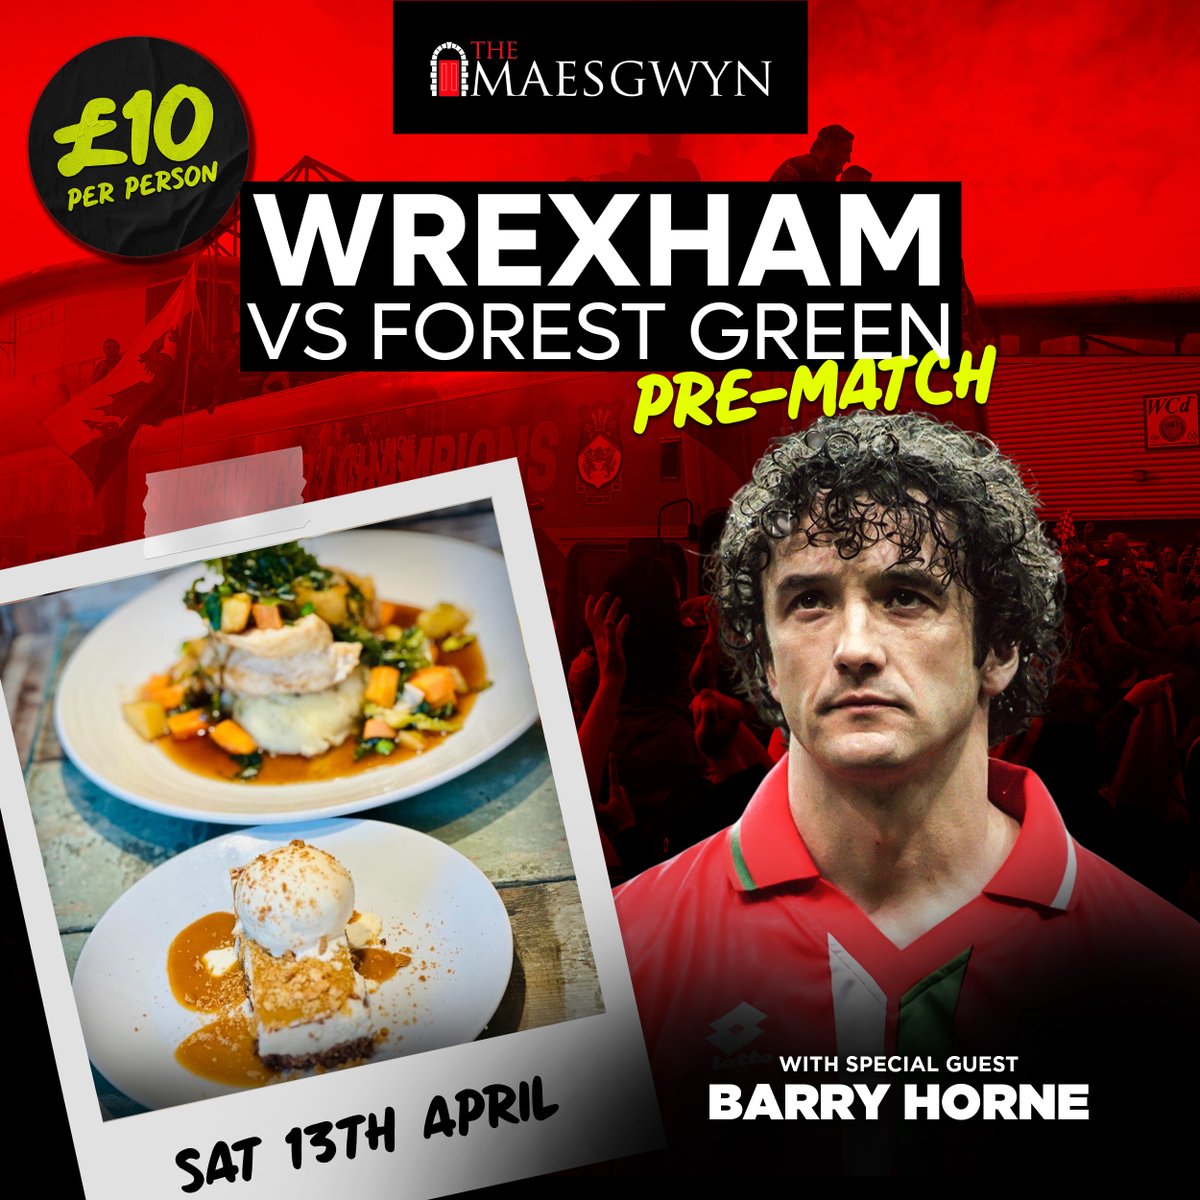 🍺⚽️ P R E - M A T C H ⚽️ 🍺 Wrexham vs Forest Green - Sat 13th April 😋 Sauteed chicken with hot pots sauce and tarragon mash 😘 Biscoff cheesecake With special Guest: Barry Horne £10 Per Person ⬇️BOOK NOW ⬇️ loom.ly/QGv7qj8